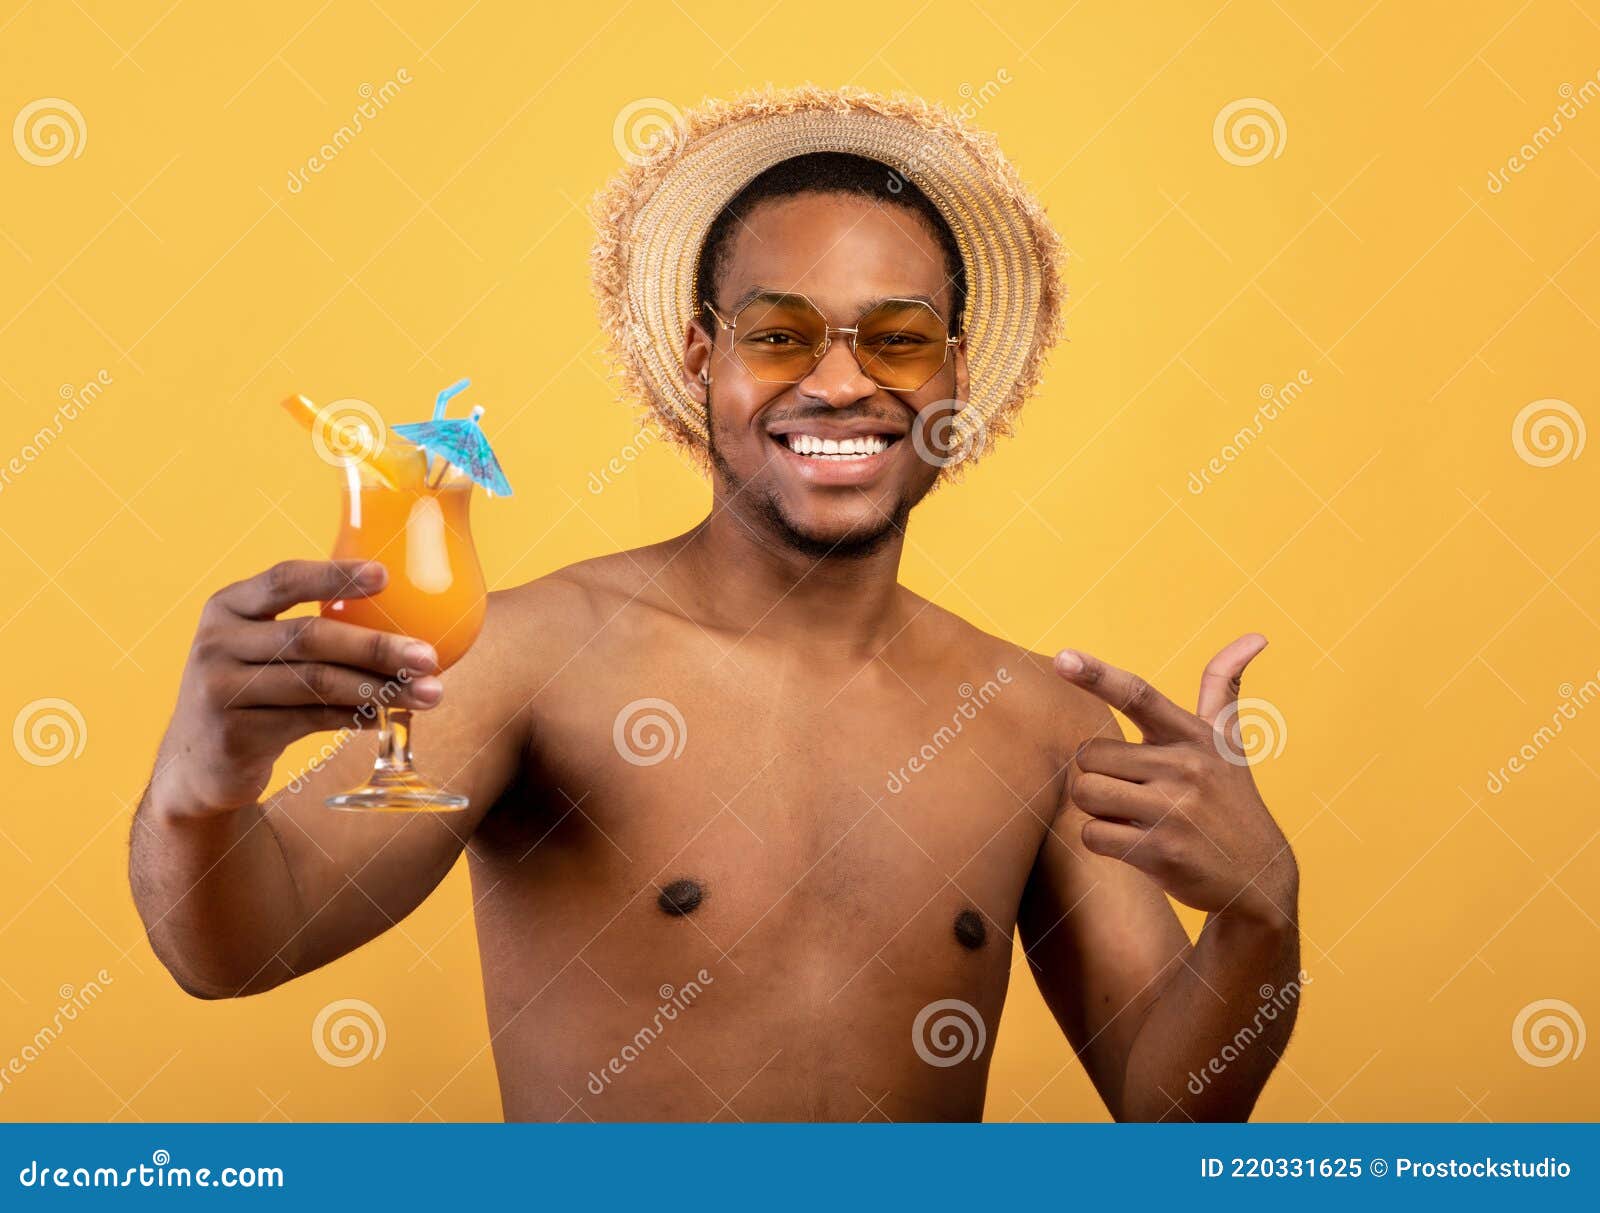 Handsome Black Man with Bare Chest Pointing at Tasty Summer